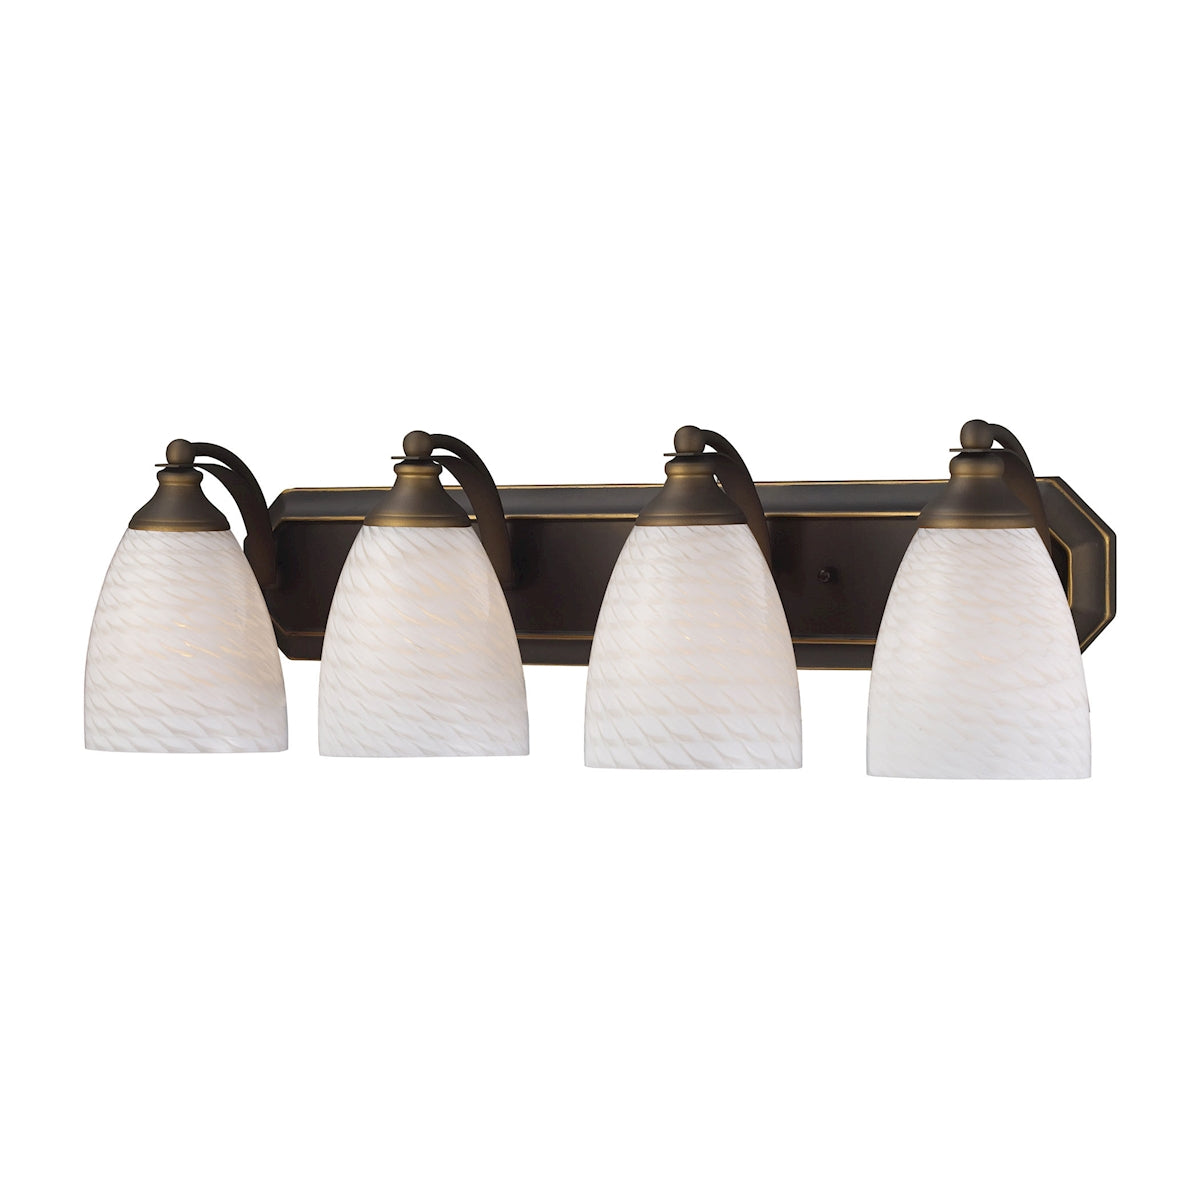 ELK Lighting 570-4B-WS Mix-N-Match Vanity 4-Light Wall Lamp in Aged Bronze with White Swirl Glass